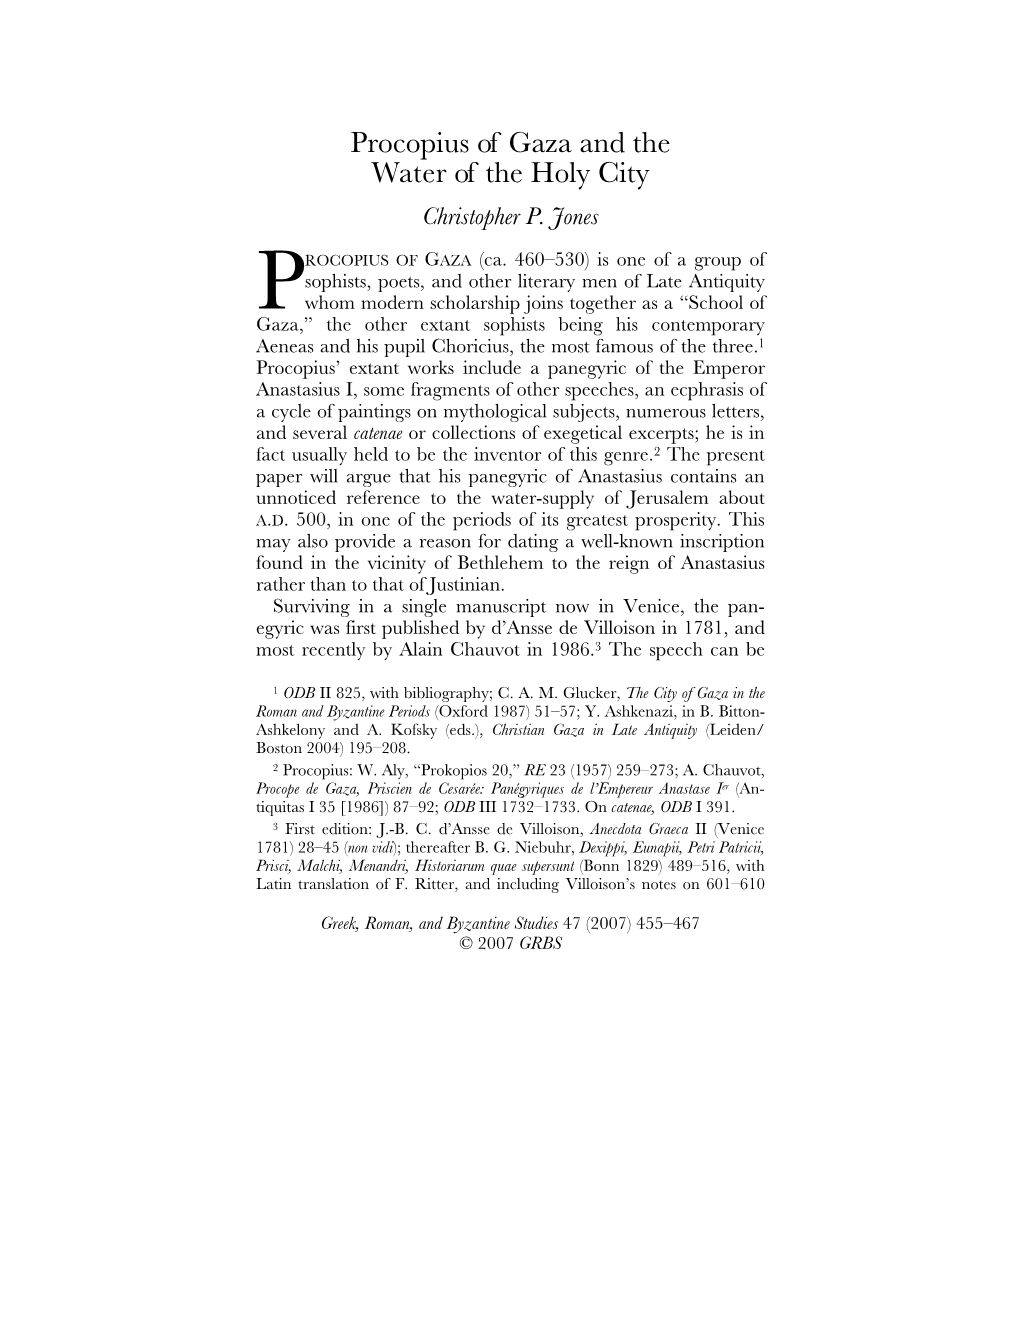 Procopius of Gaza and the Water of the Holy City Christopher P